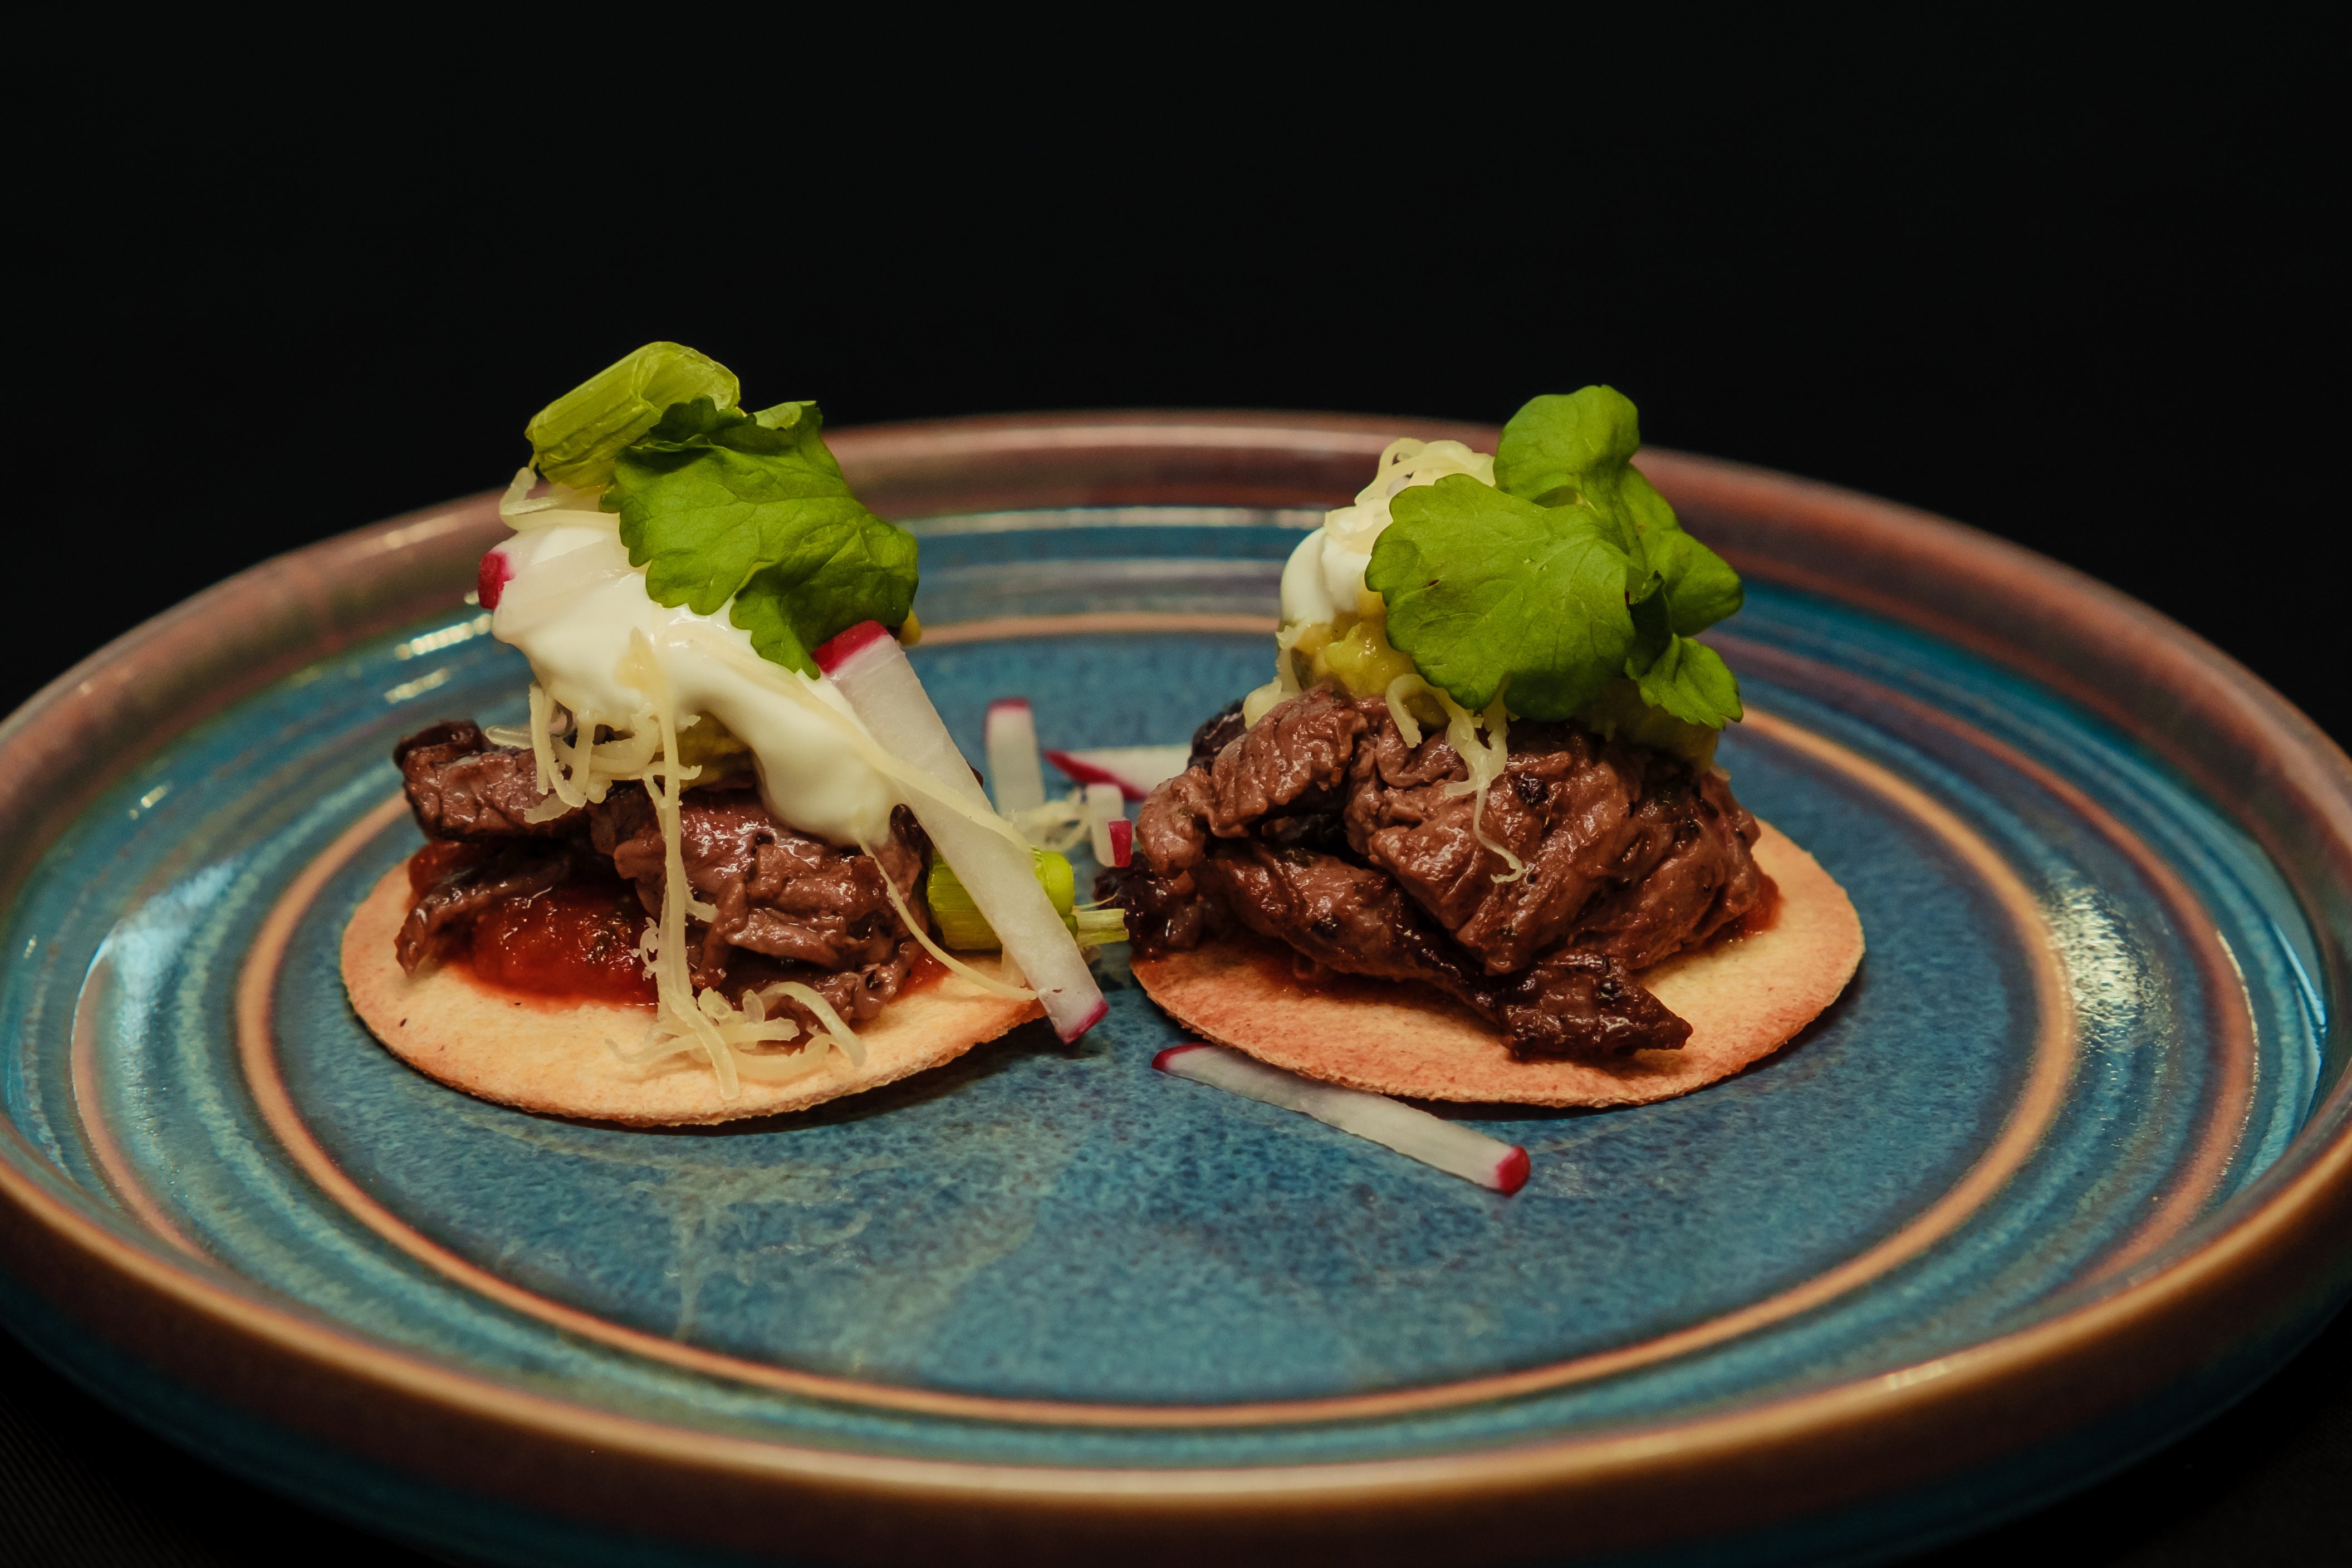 Bavette Steak Tacos with Salsa Roja and Guacamole